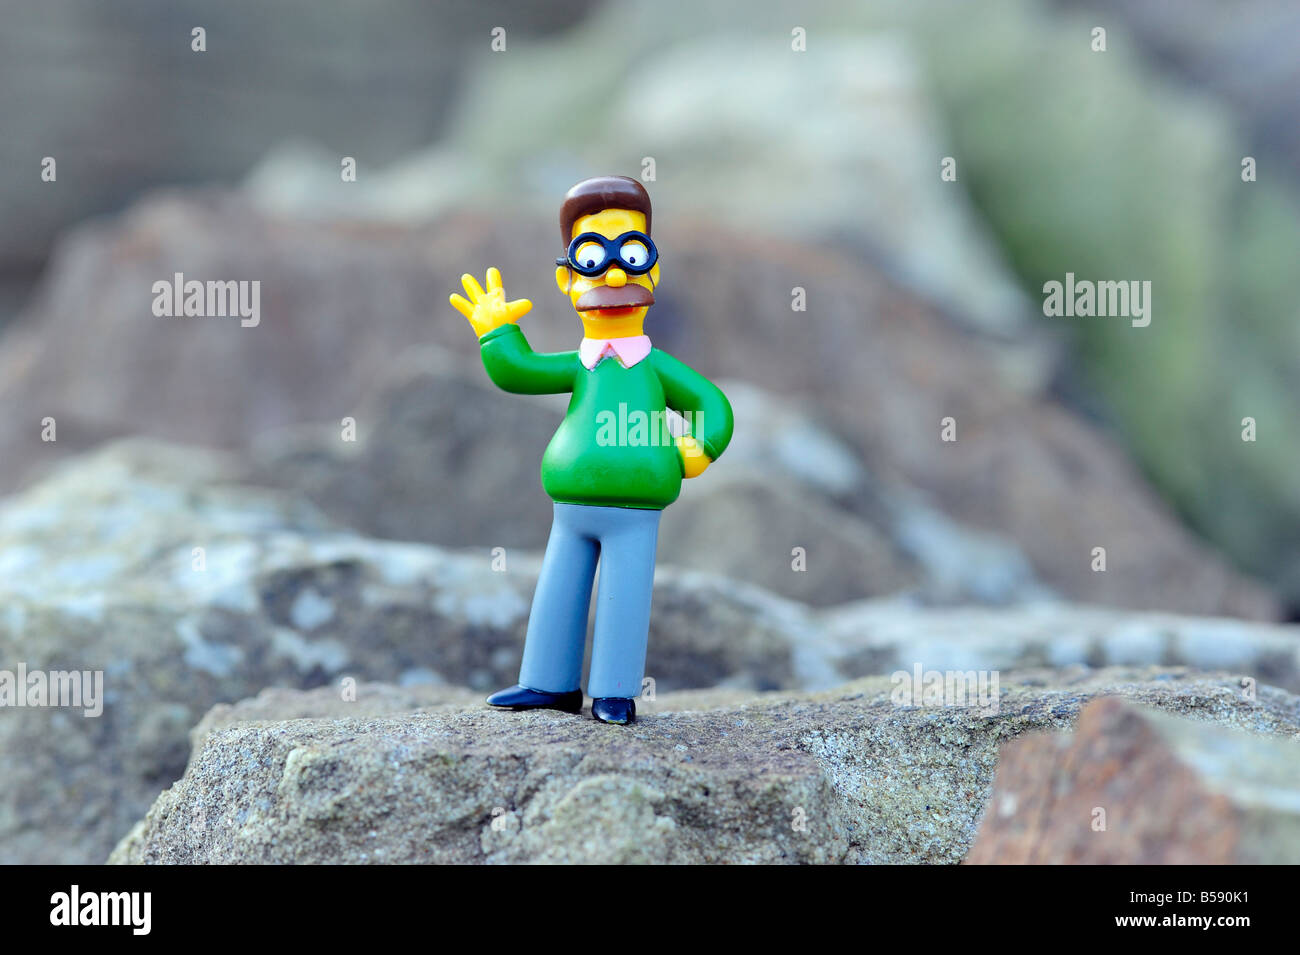 ned flanders simpsons homer's neighbour christian american character wave spectacles glasses man male usa toy model dweeb geek Stock Photo